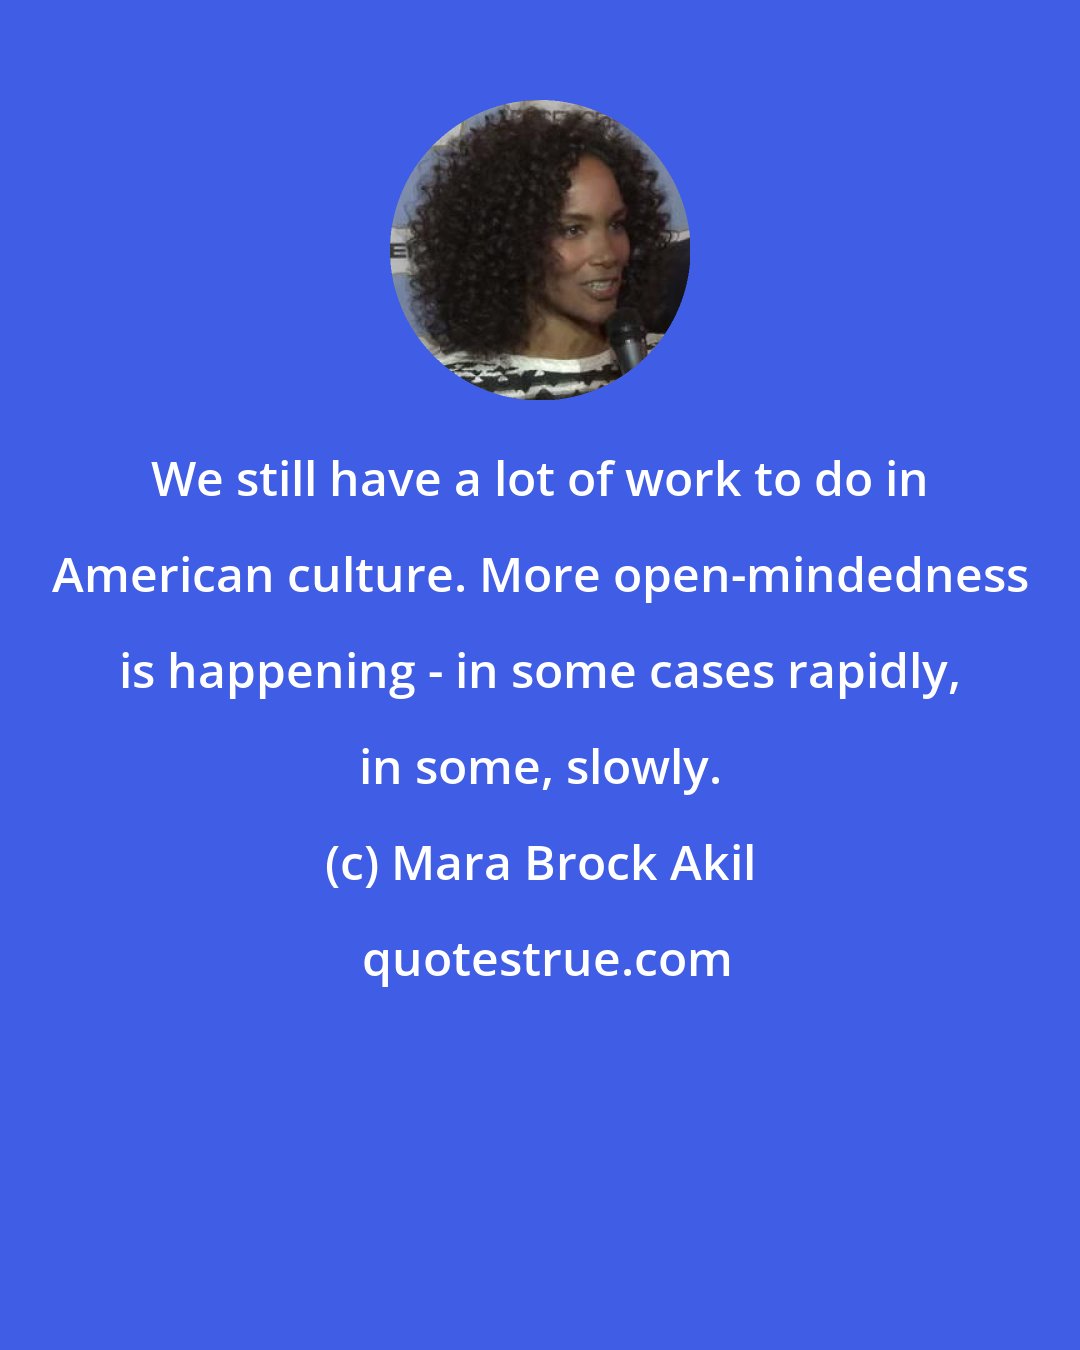 Mara Brock Akil: We still have a lot of work to do in American culture. More open-mindedness is happening - in some cases rapidly, in some, slowly.